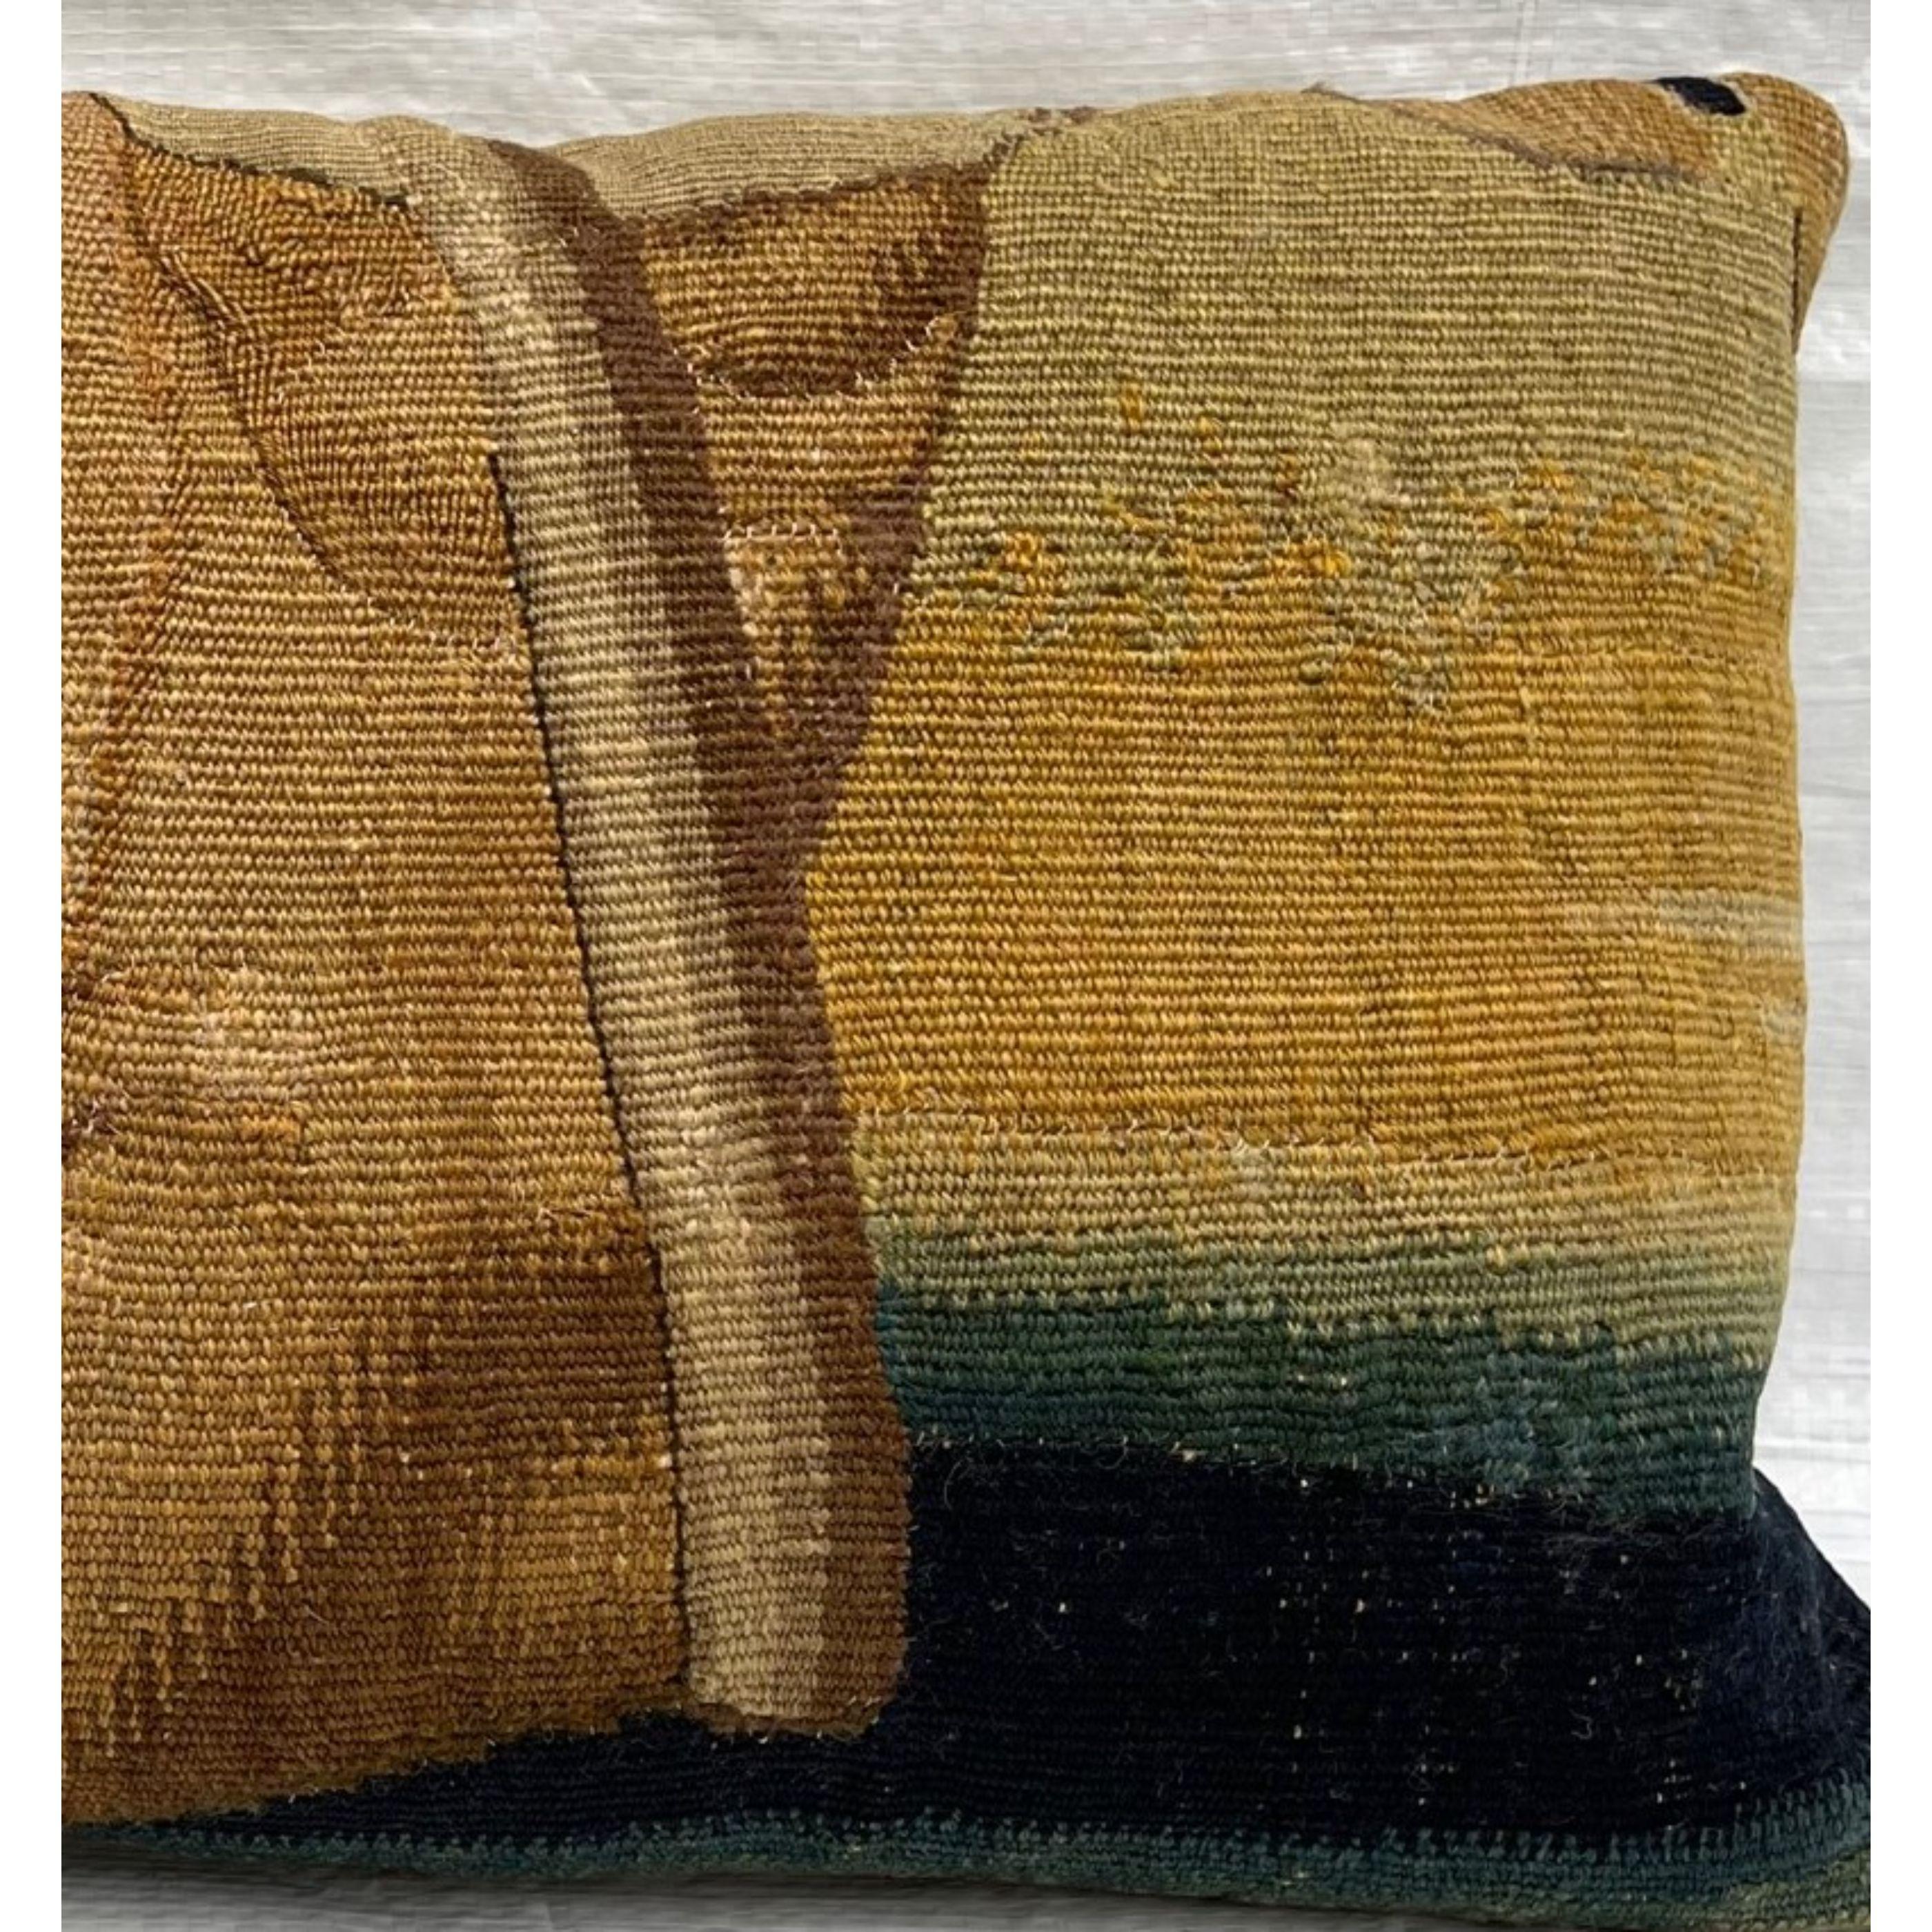 17th Century Flemish Tapestry Pillow - 10